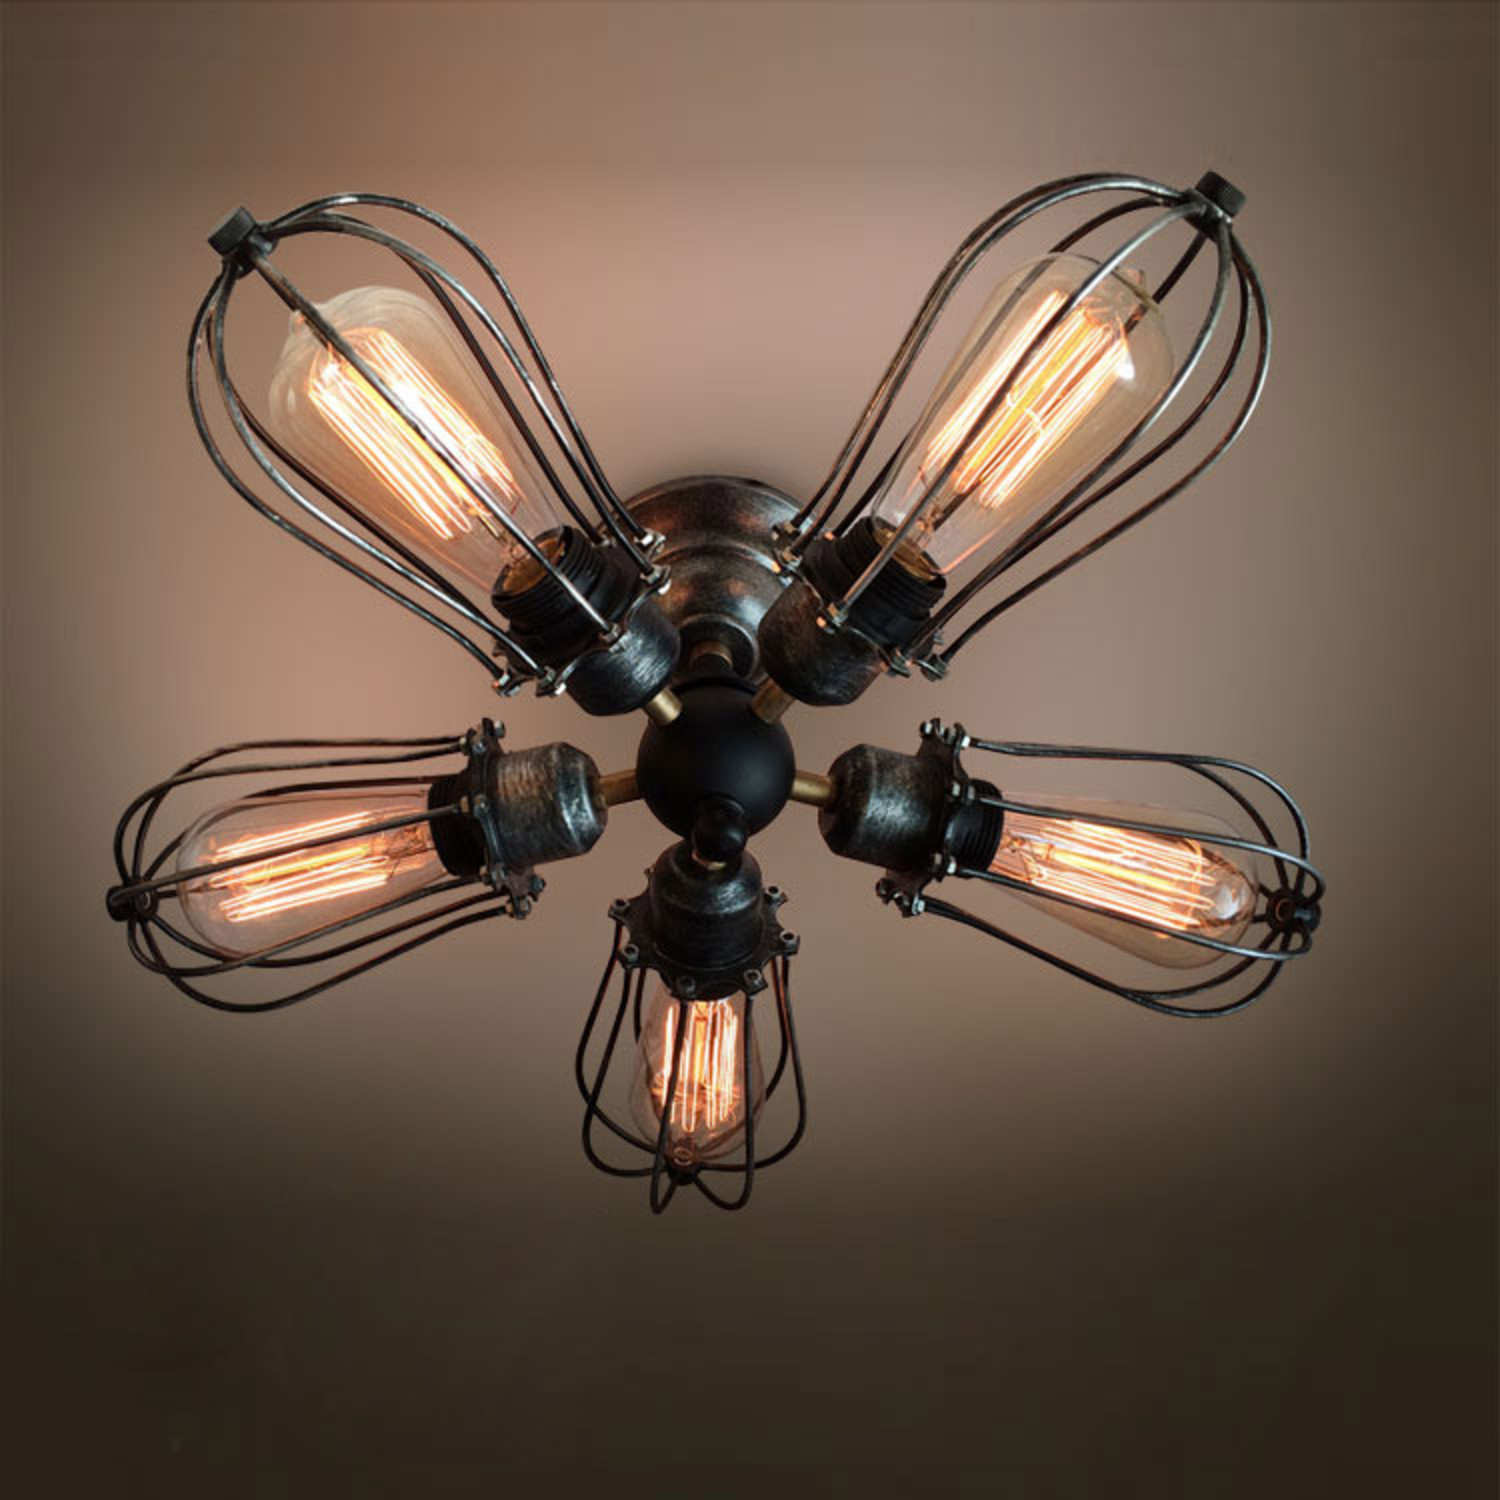 5 Armed Squirrel Cage Ceiling Light Westmenlights Touch